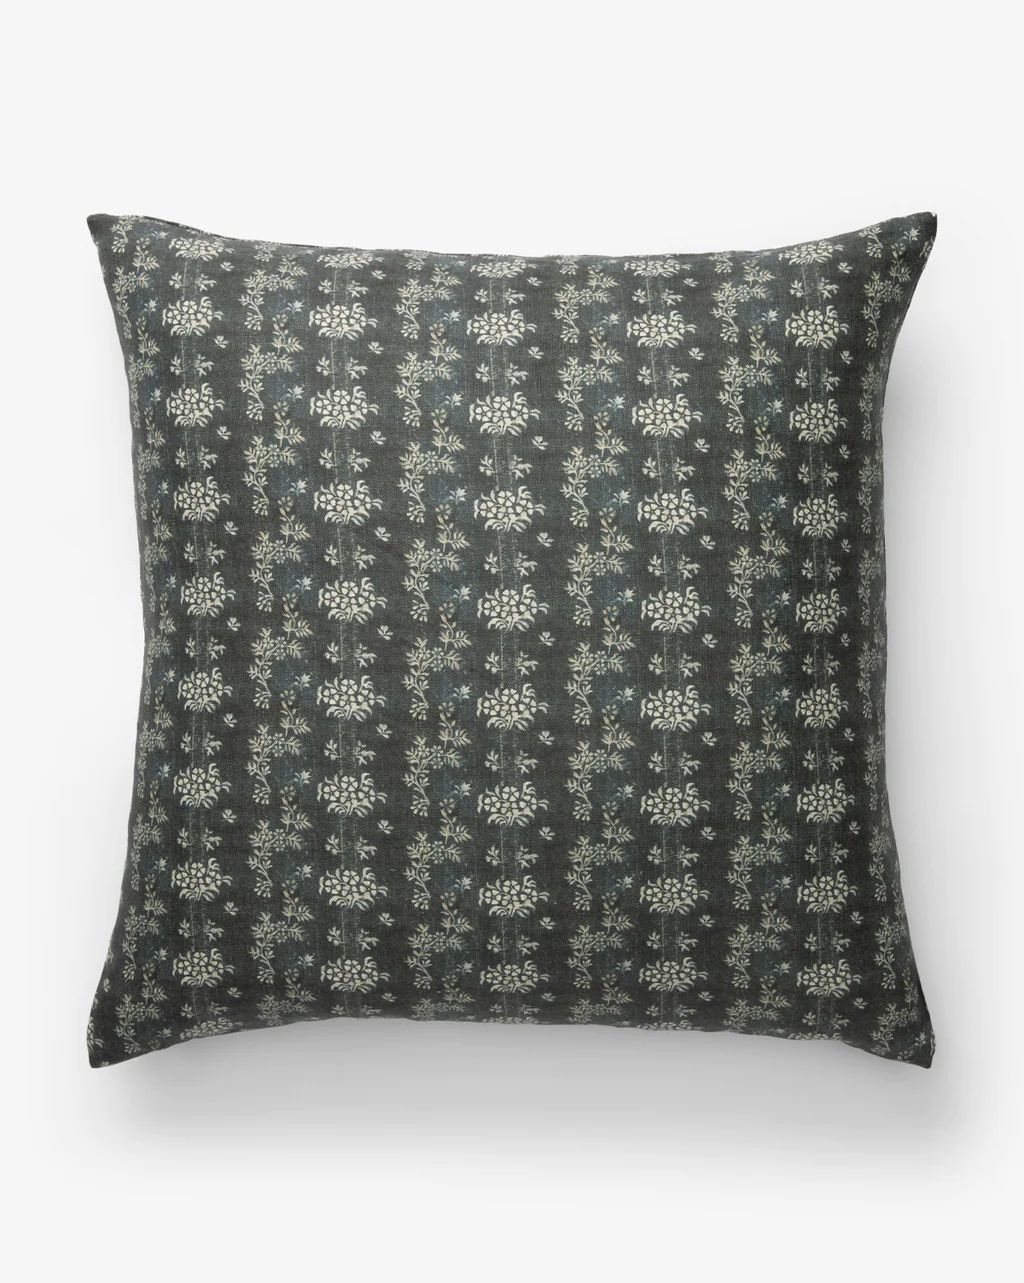 Elisa Pillow Cover | McGee & Co.